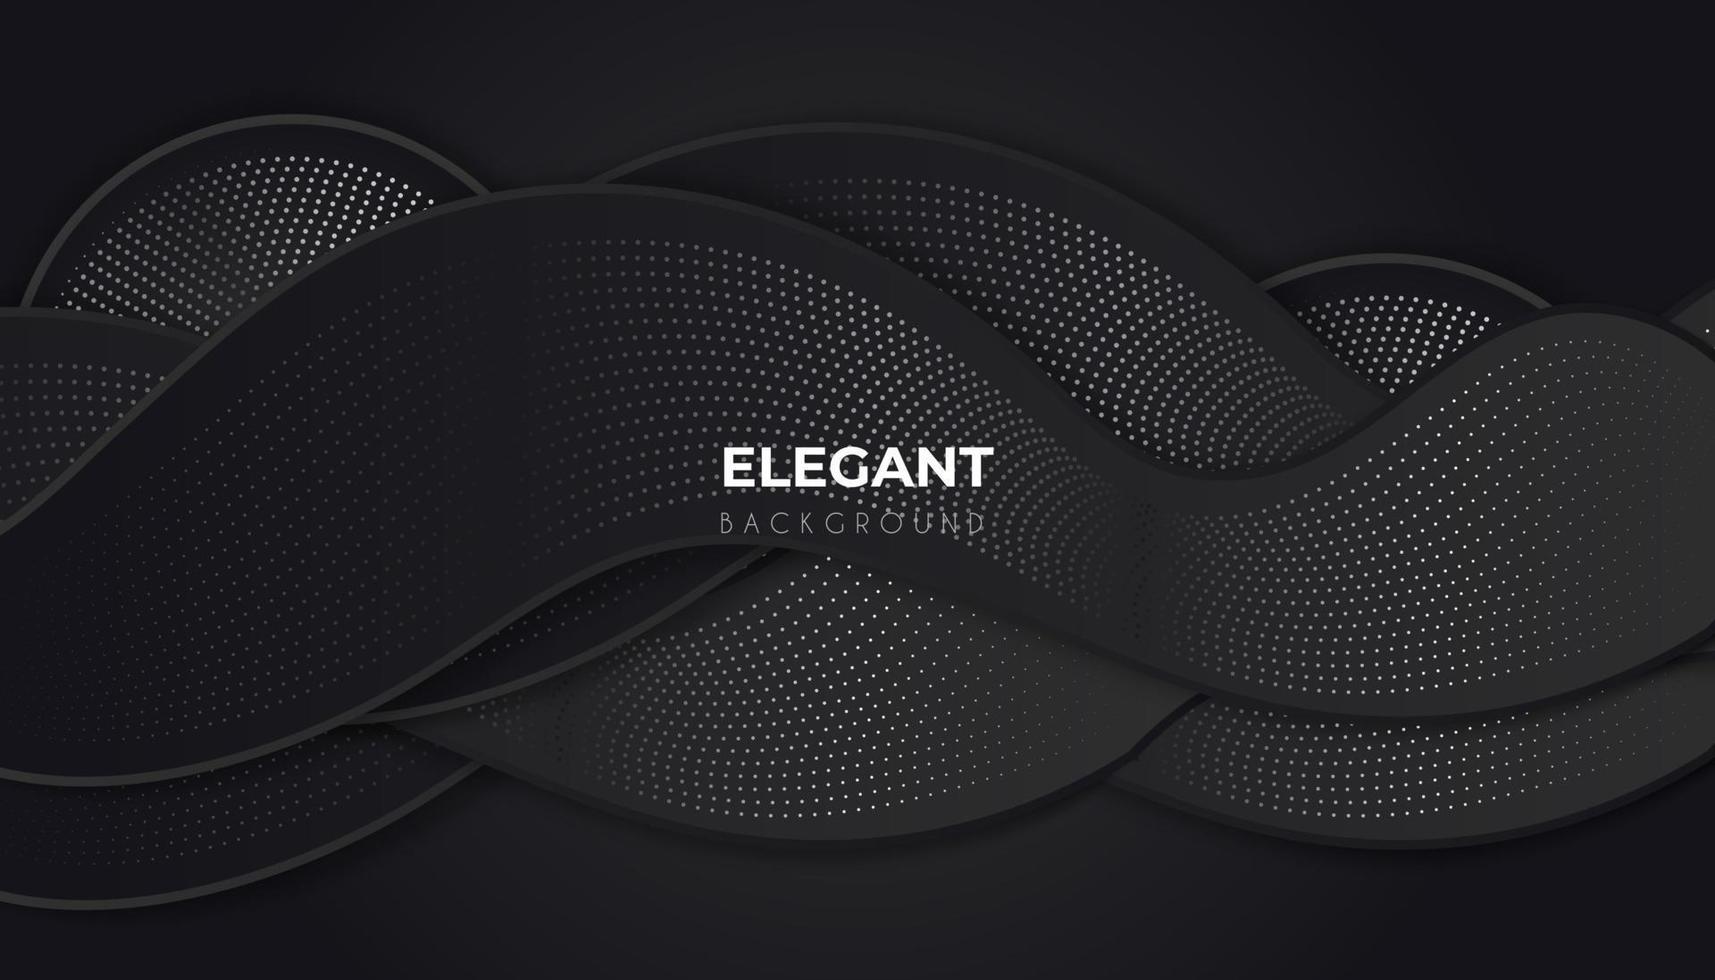 Line wavy geometric shapes with dark luxury background vector